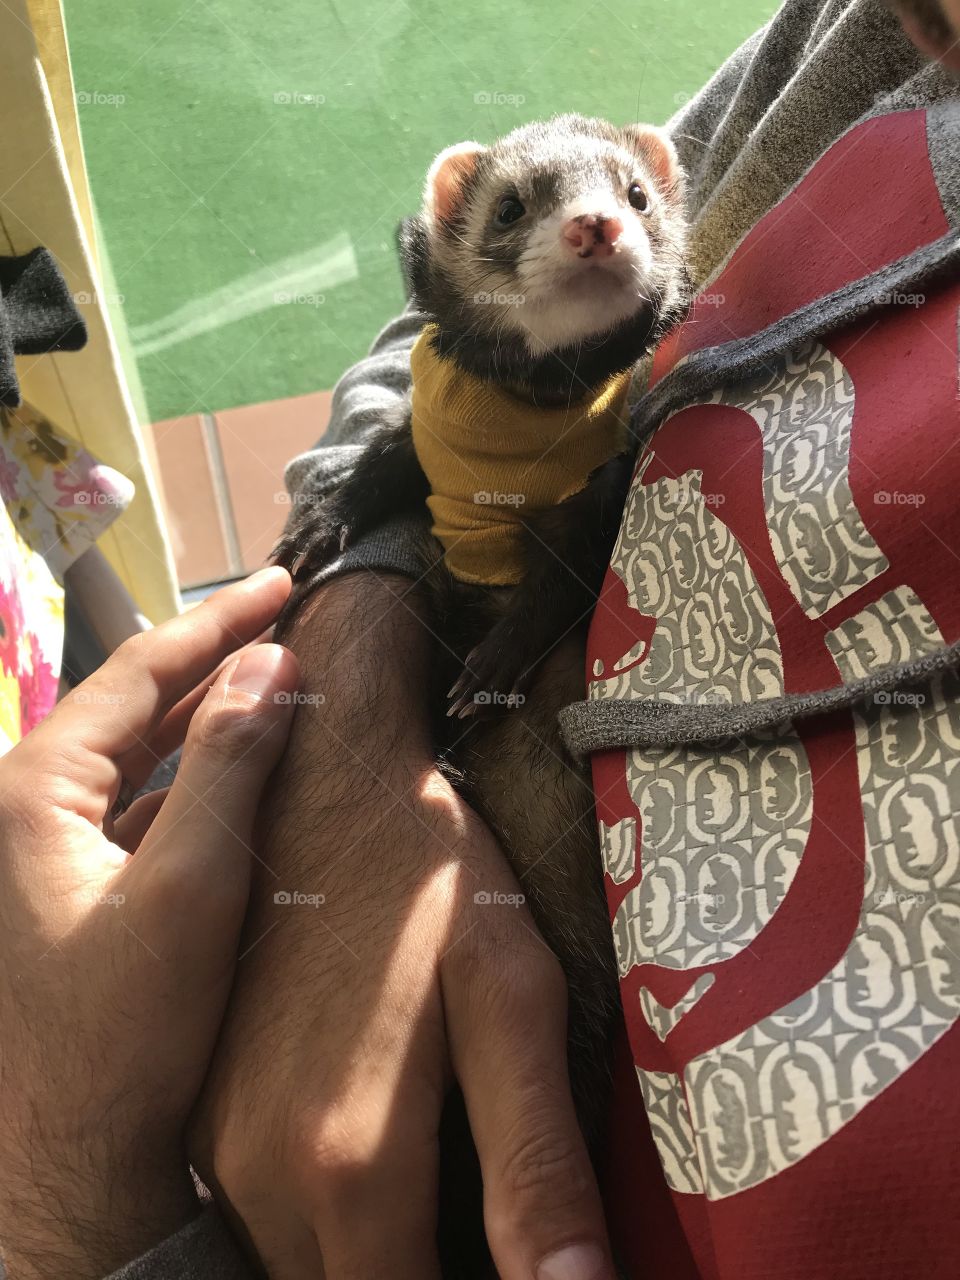 Ferret with cozy sweater. Those eyes are adorable.